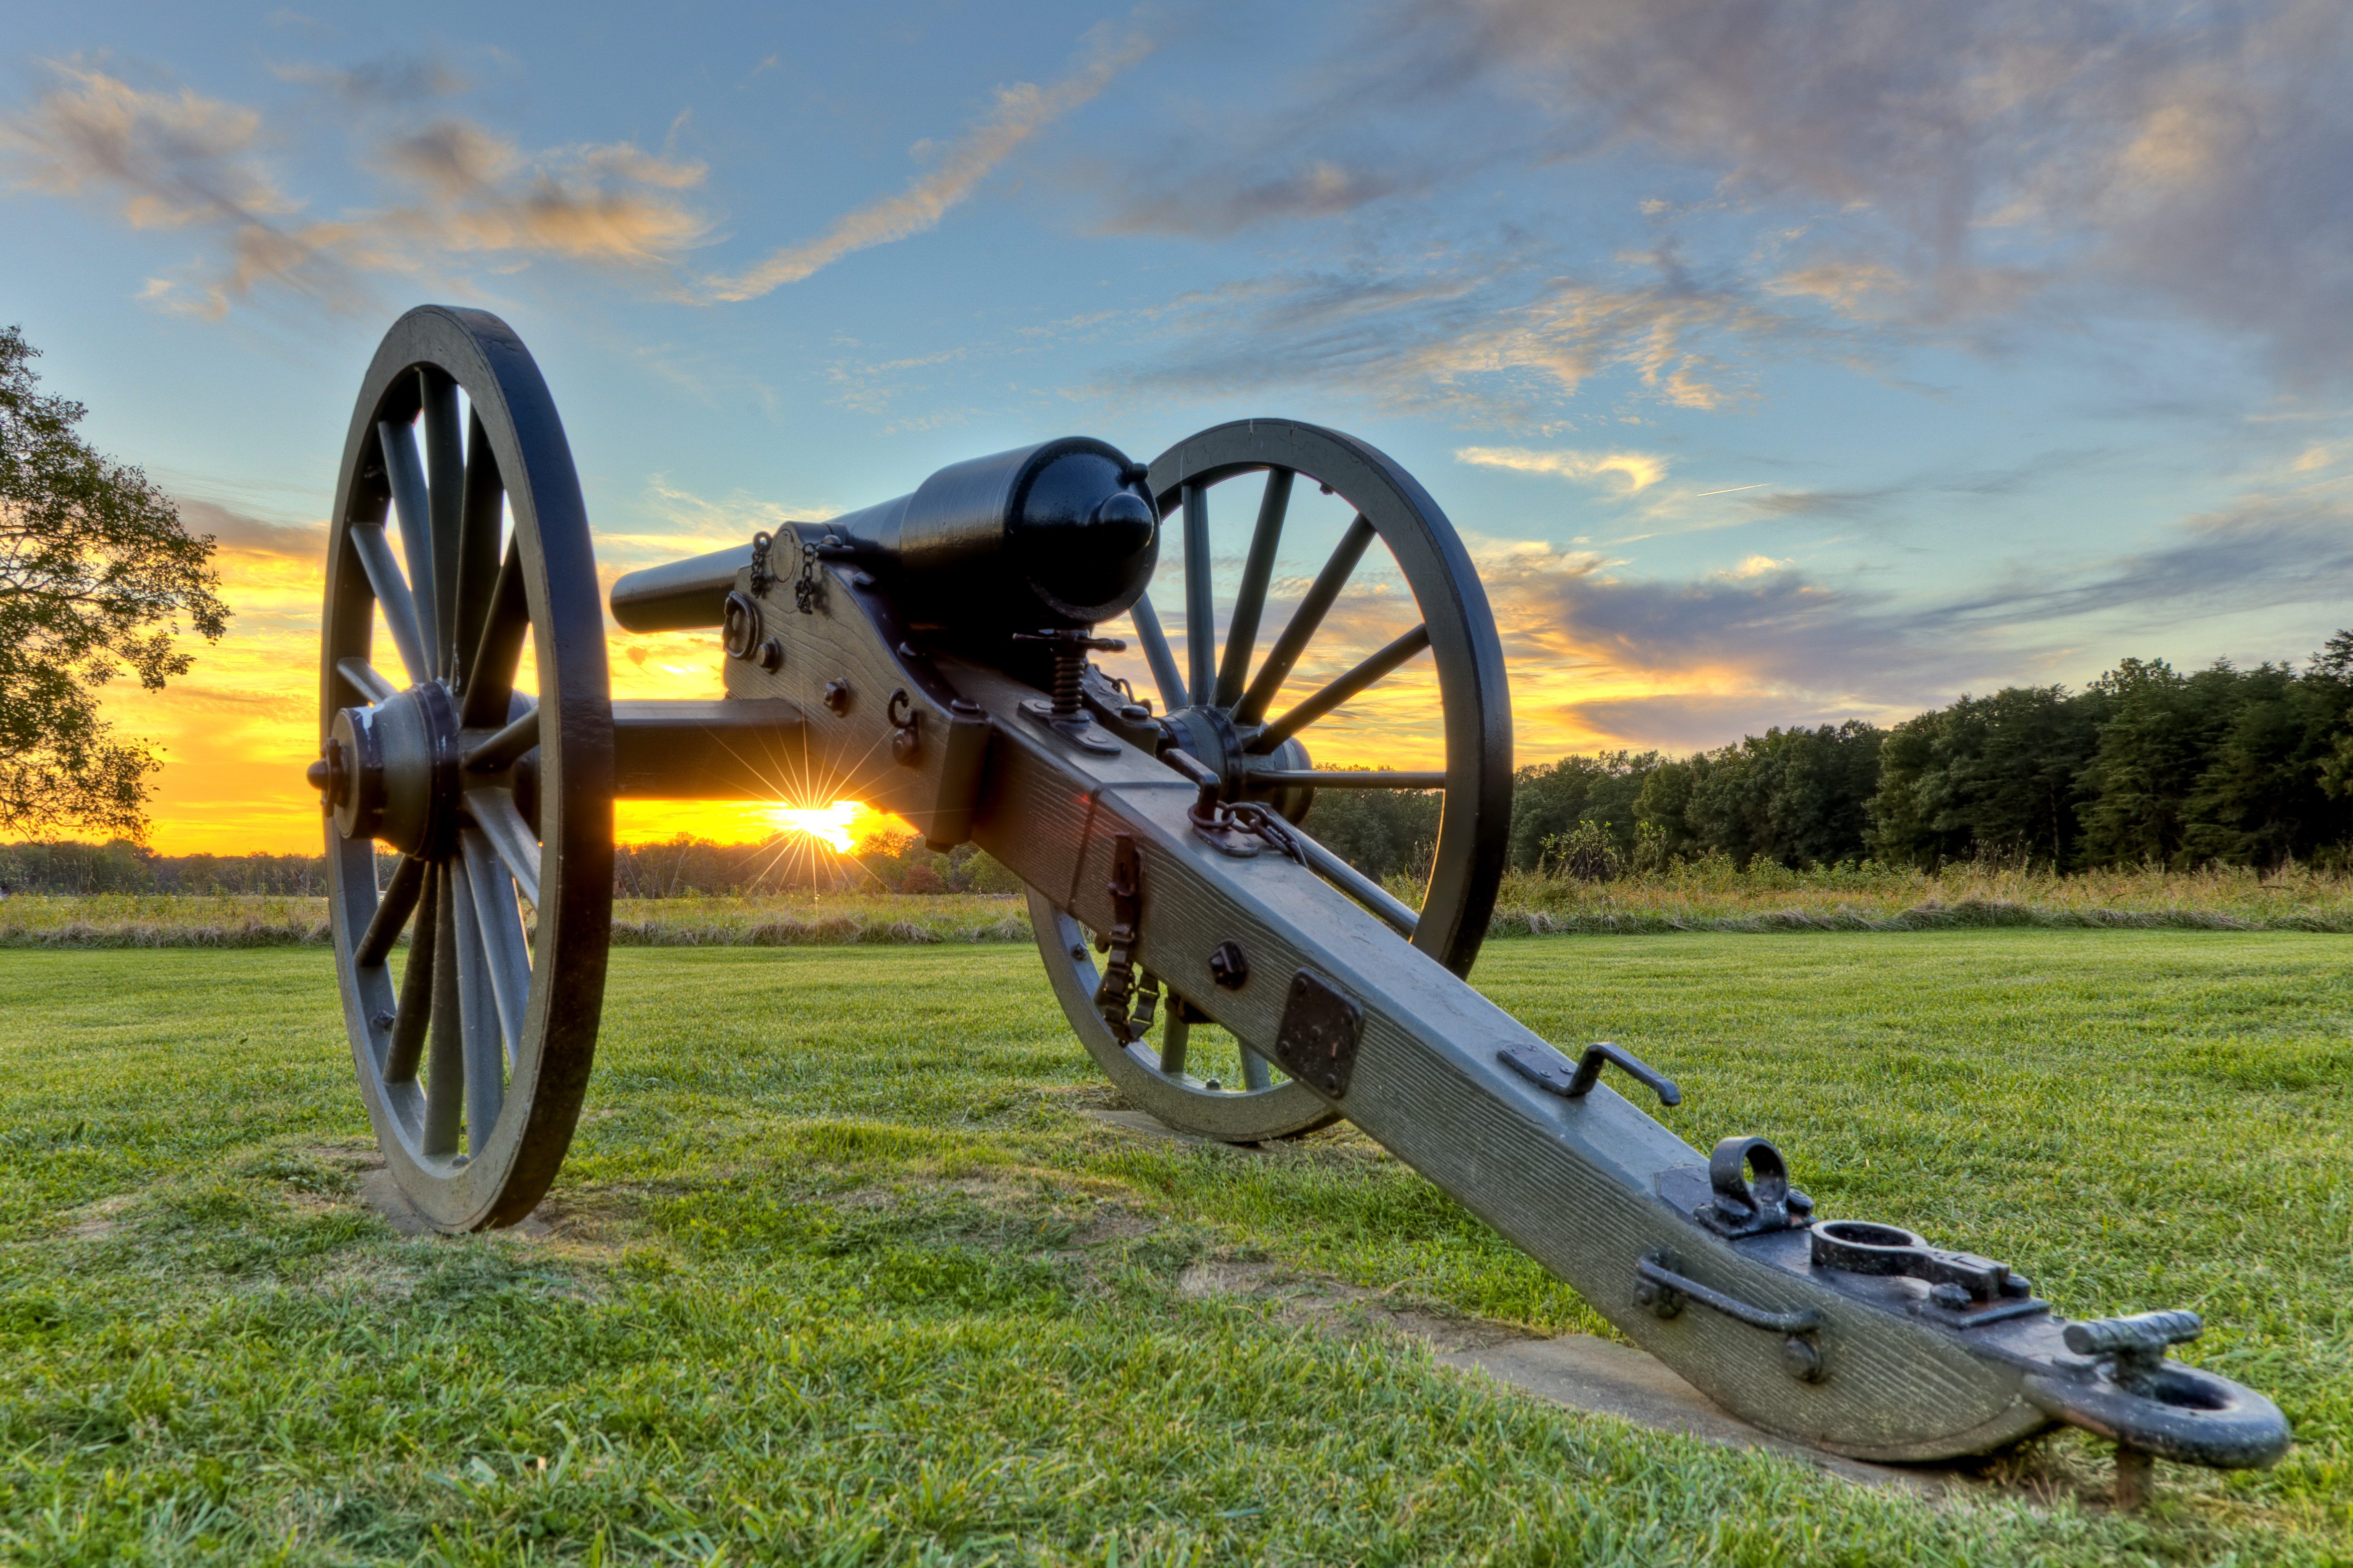 A cannon in a field at sunset